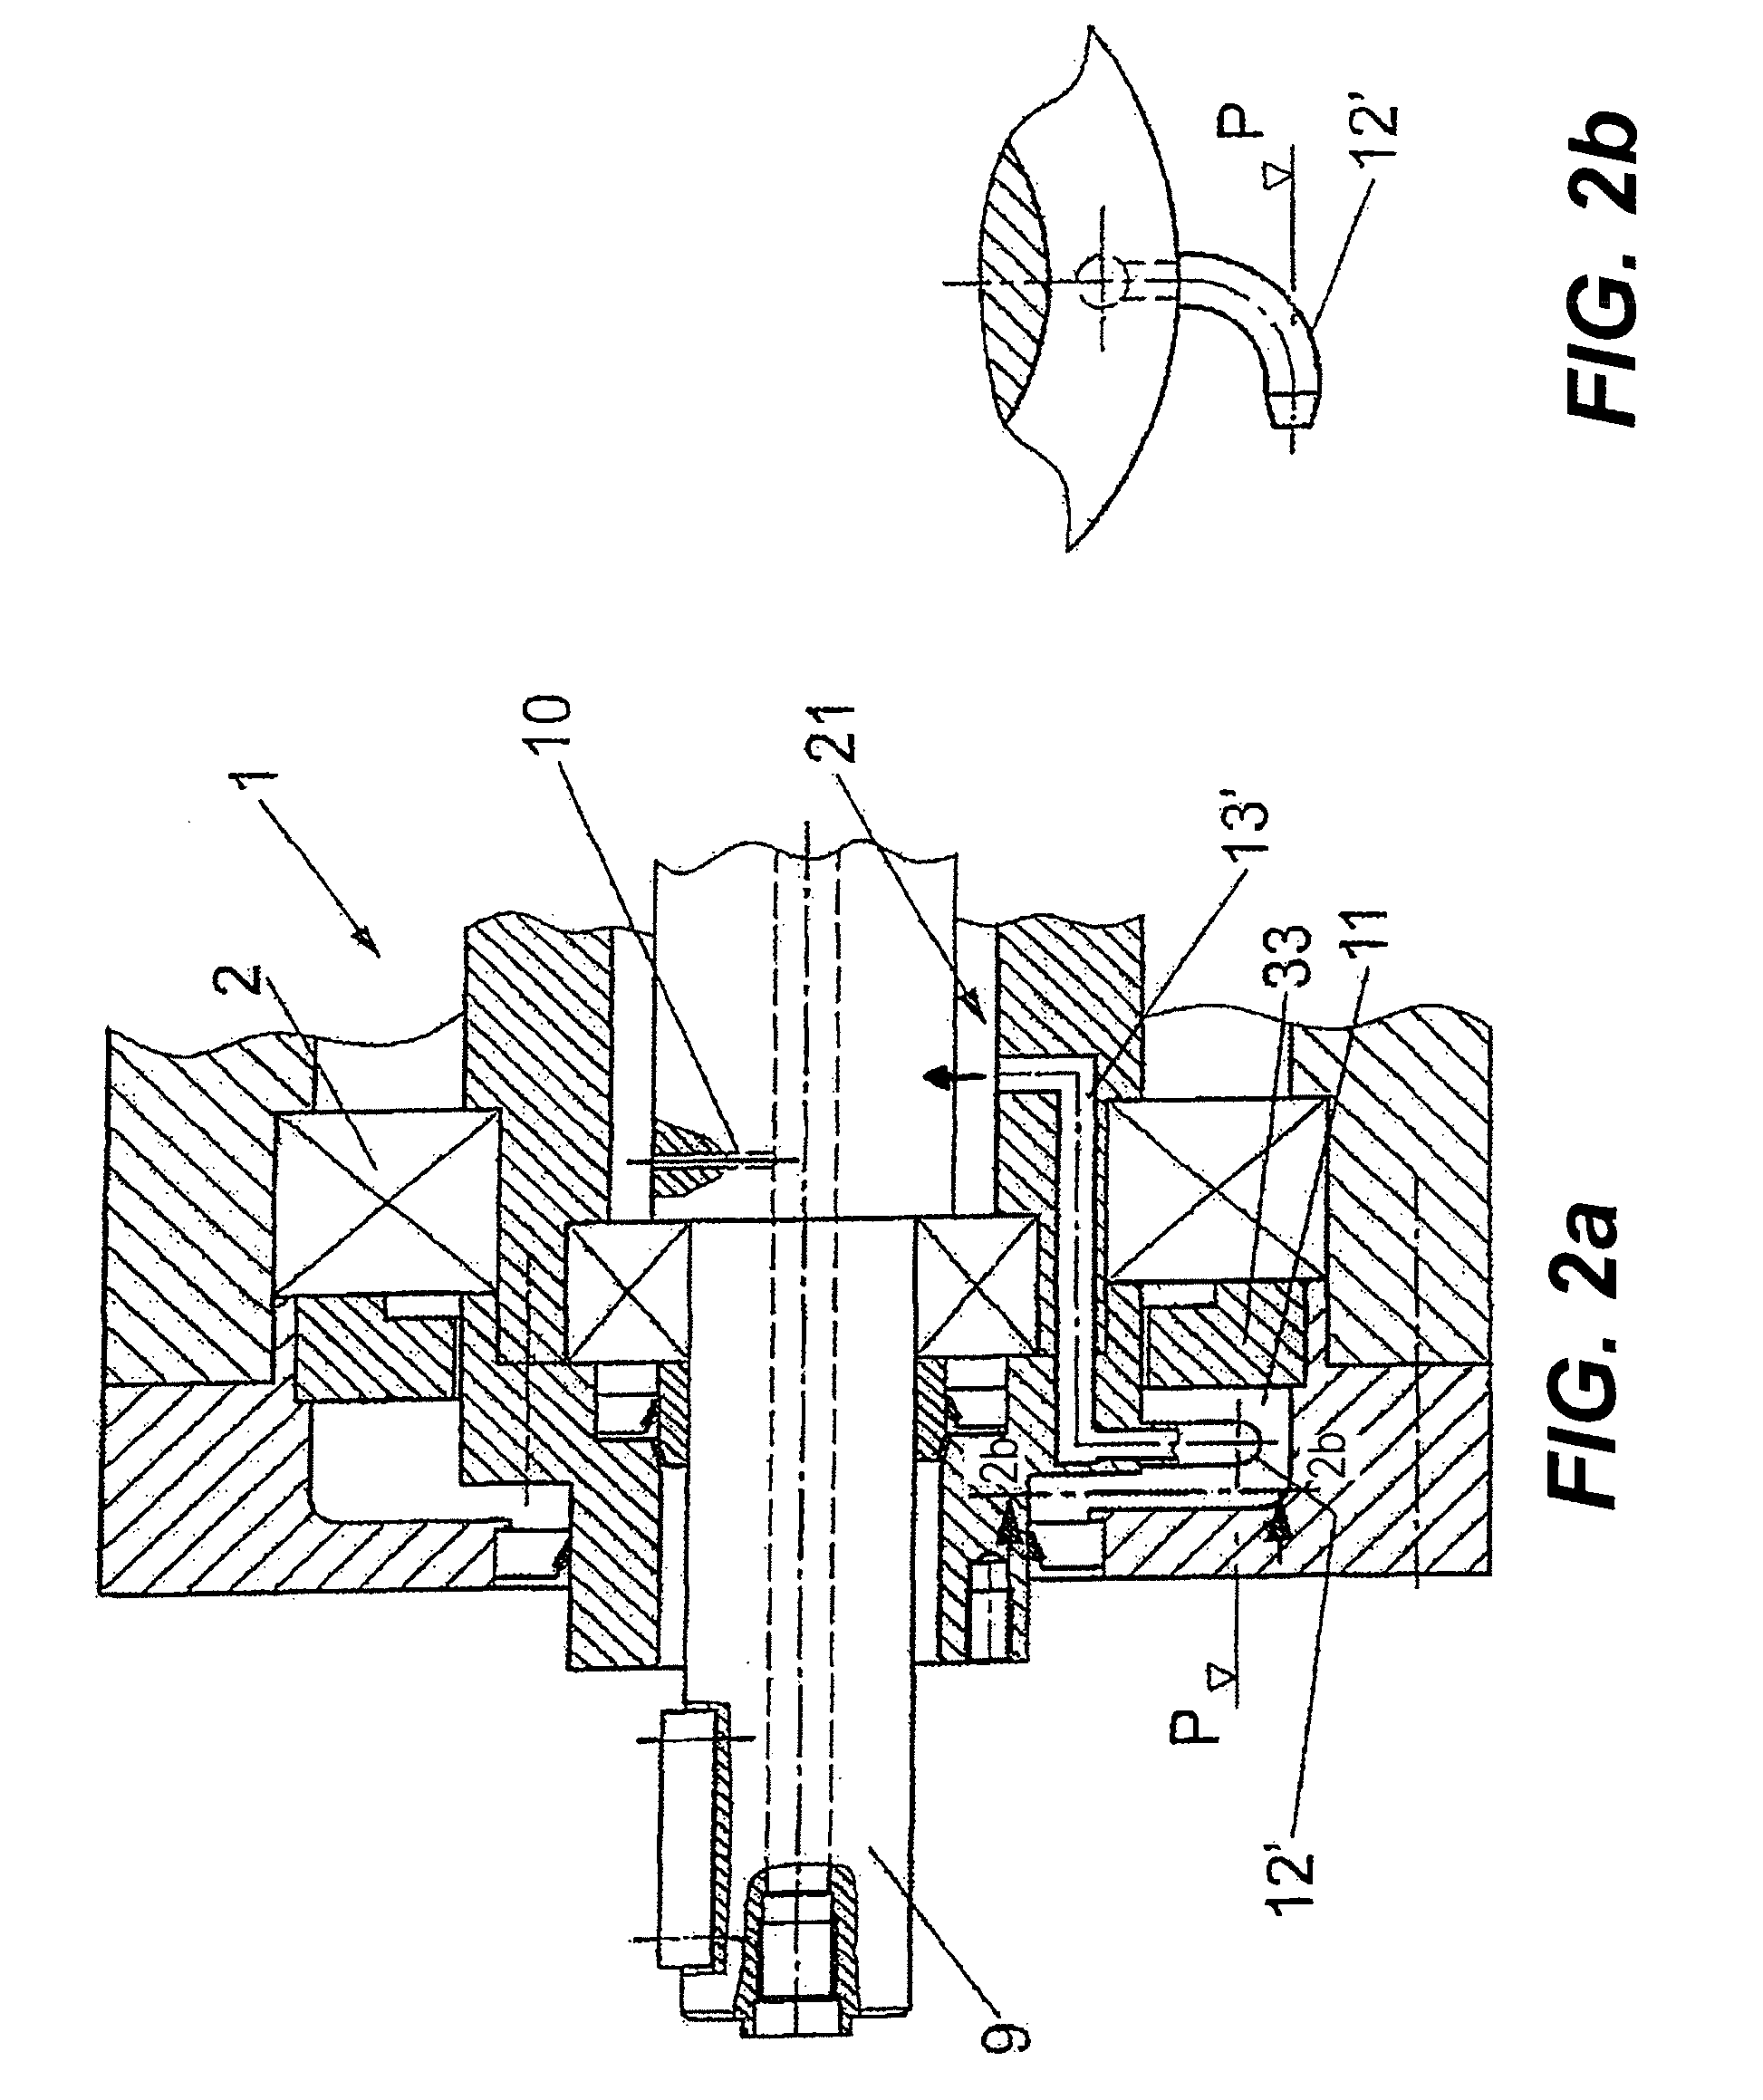 Gear apparatus for a centrifuge including a drive shaft having two hollow longitudinal channels for lubricating the gear apparatus via an associated lubricant compensating system